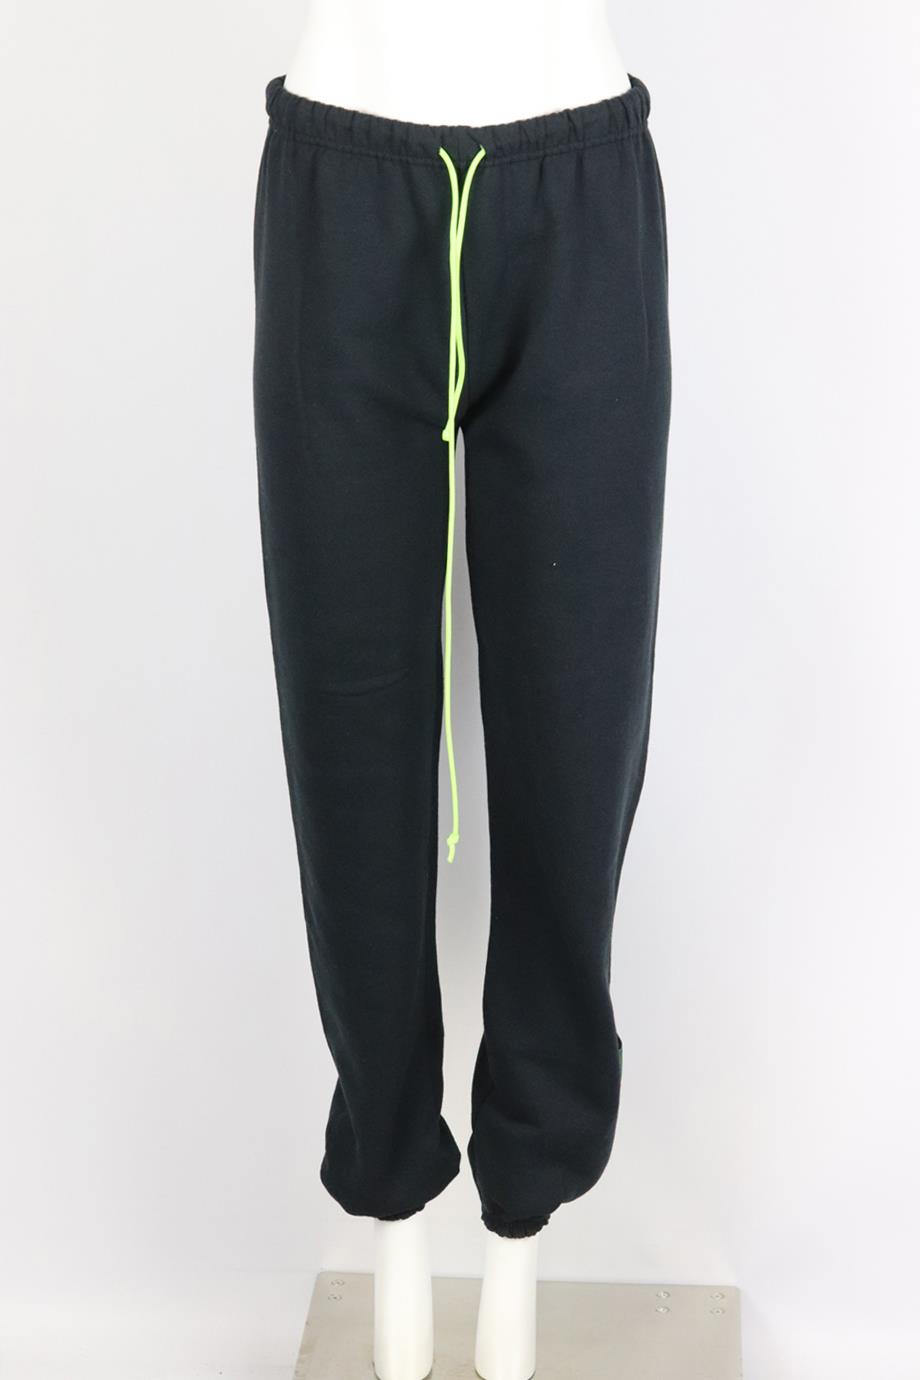 DANZY COTTON JERSEY TRACK PANTS SMALL